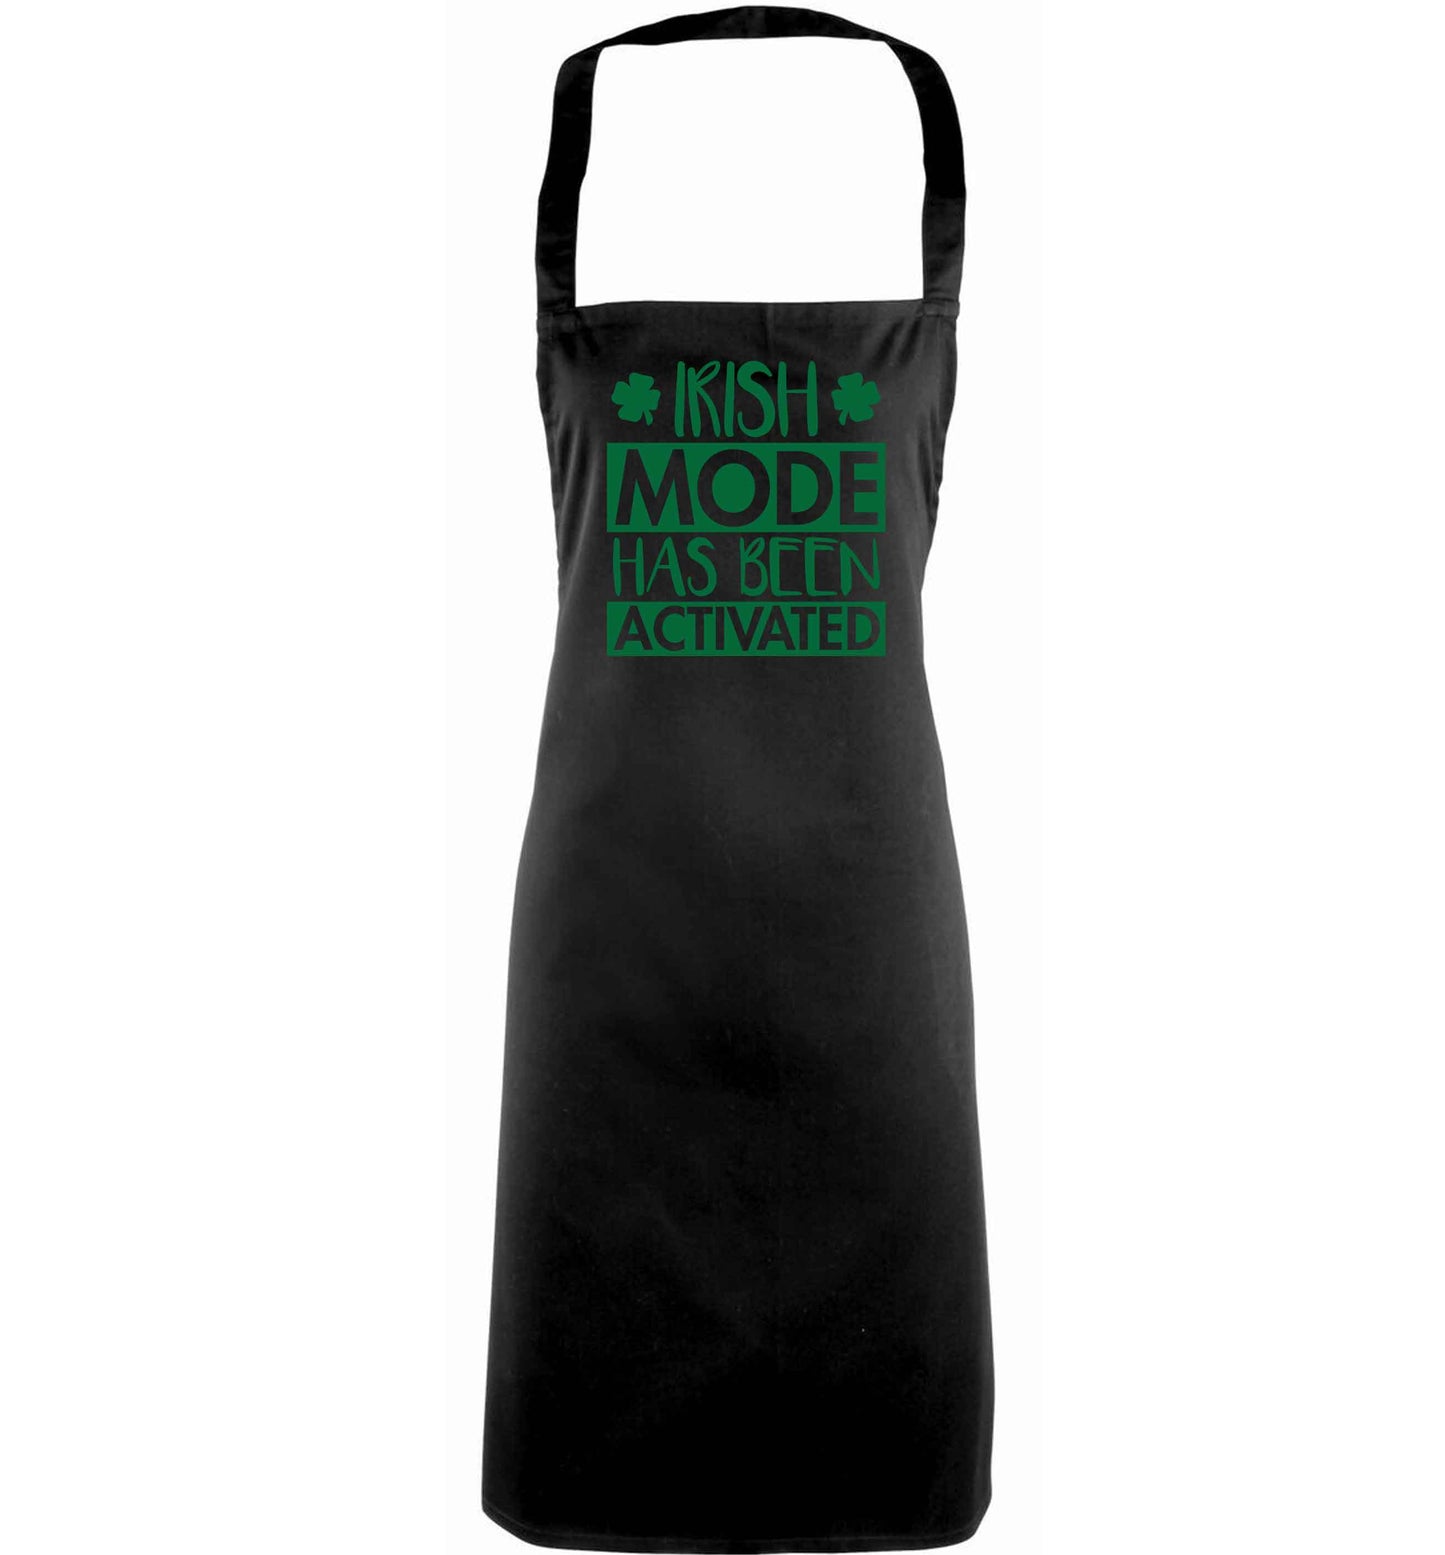 Irish mode has been activated adults black apron